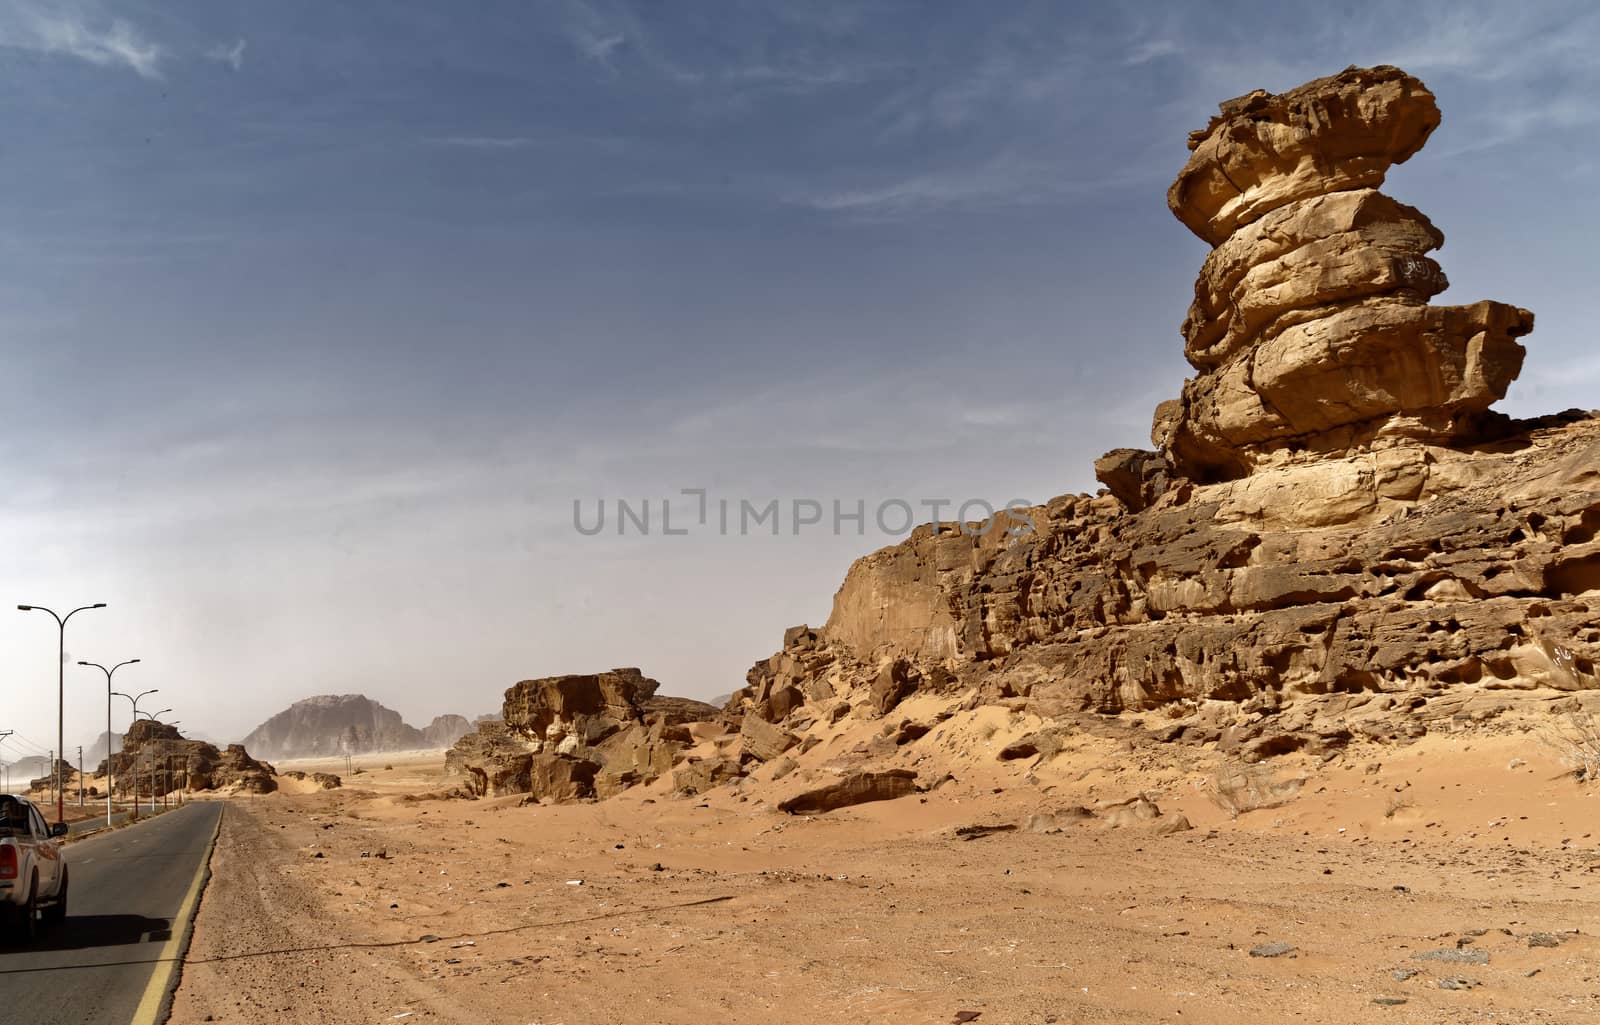 Main road south of the Wadi Rum Nature Reserve, Jordan, with impressive rock formations at the roadside